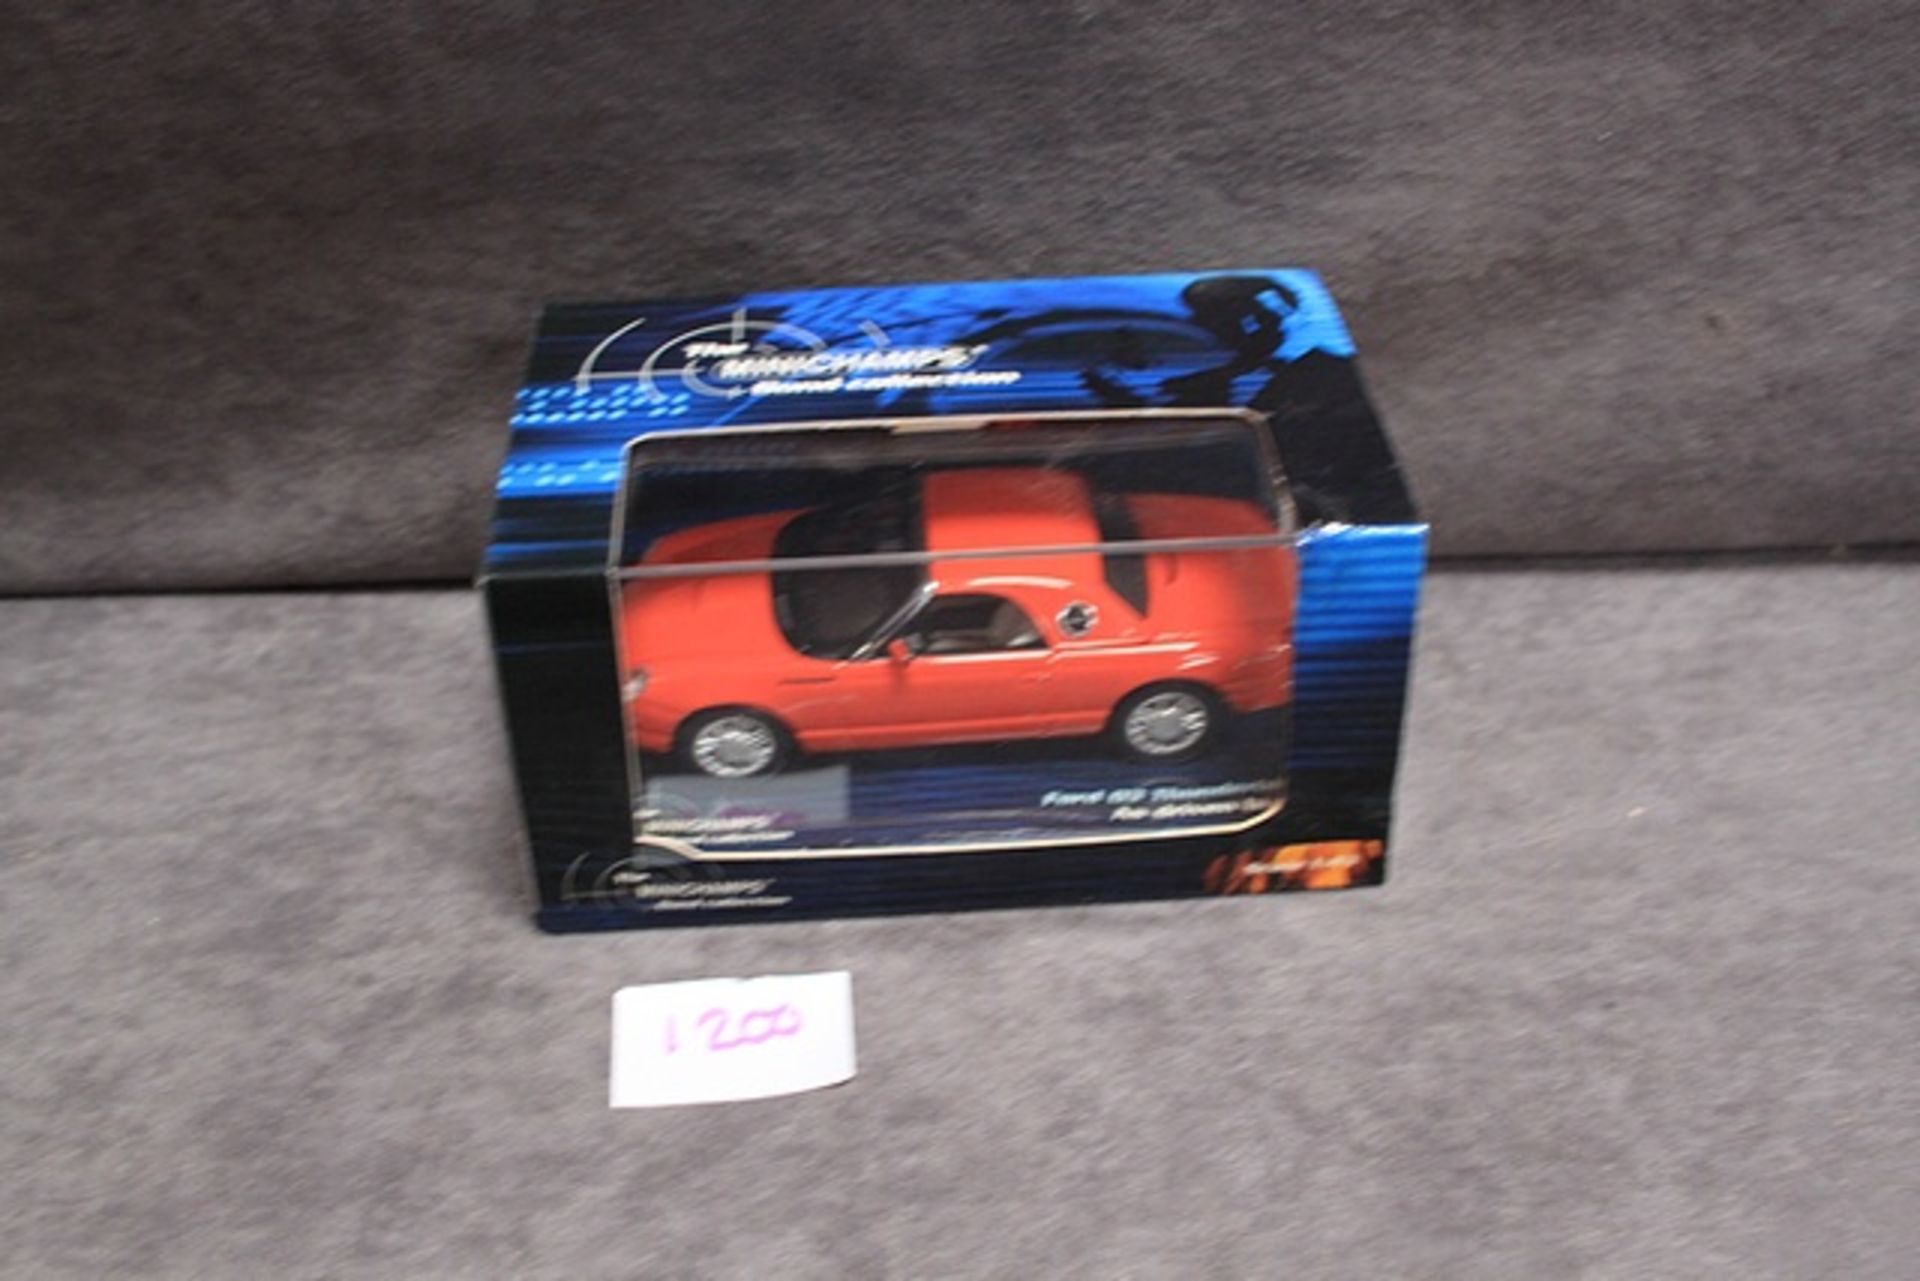 The Minichamps Bond Collection diecast Ford 03 Thunderbird from Die Another Day in display case in